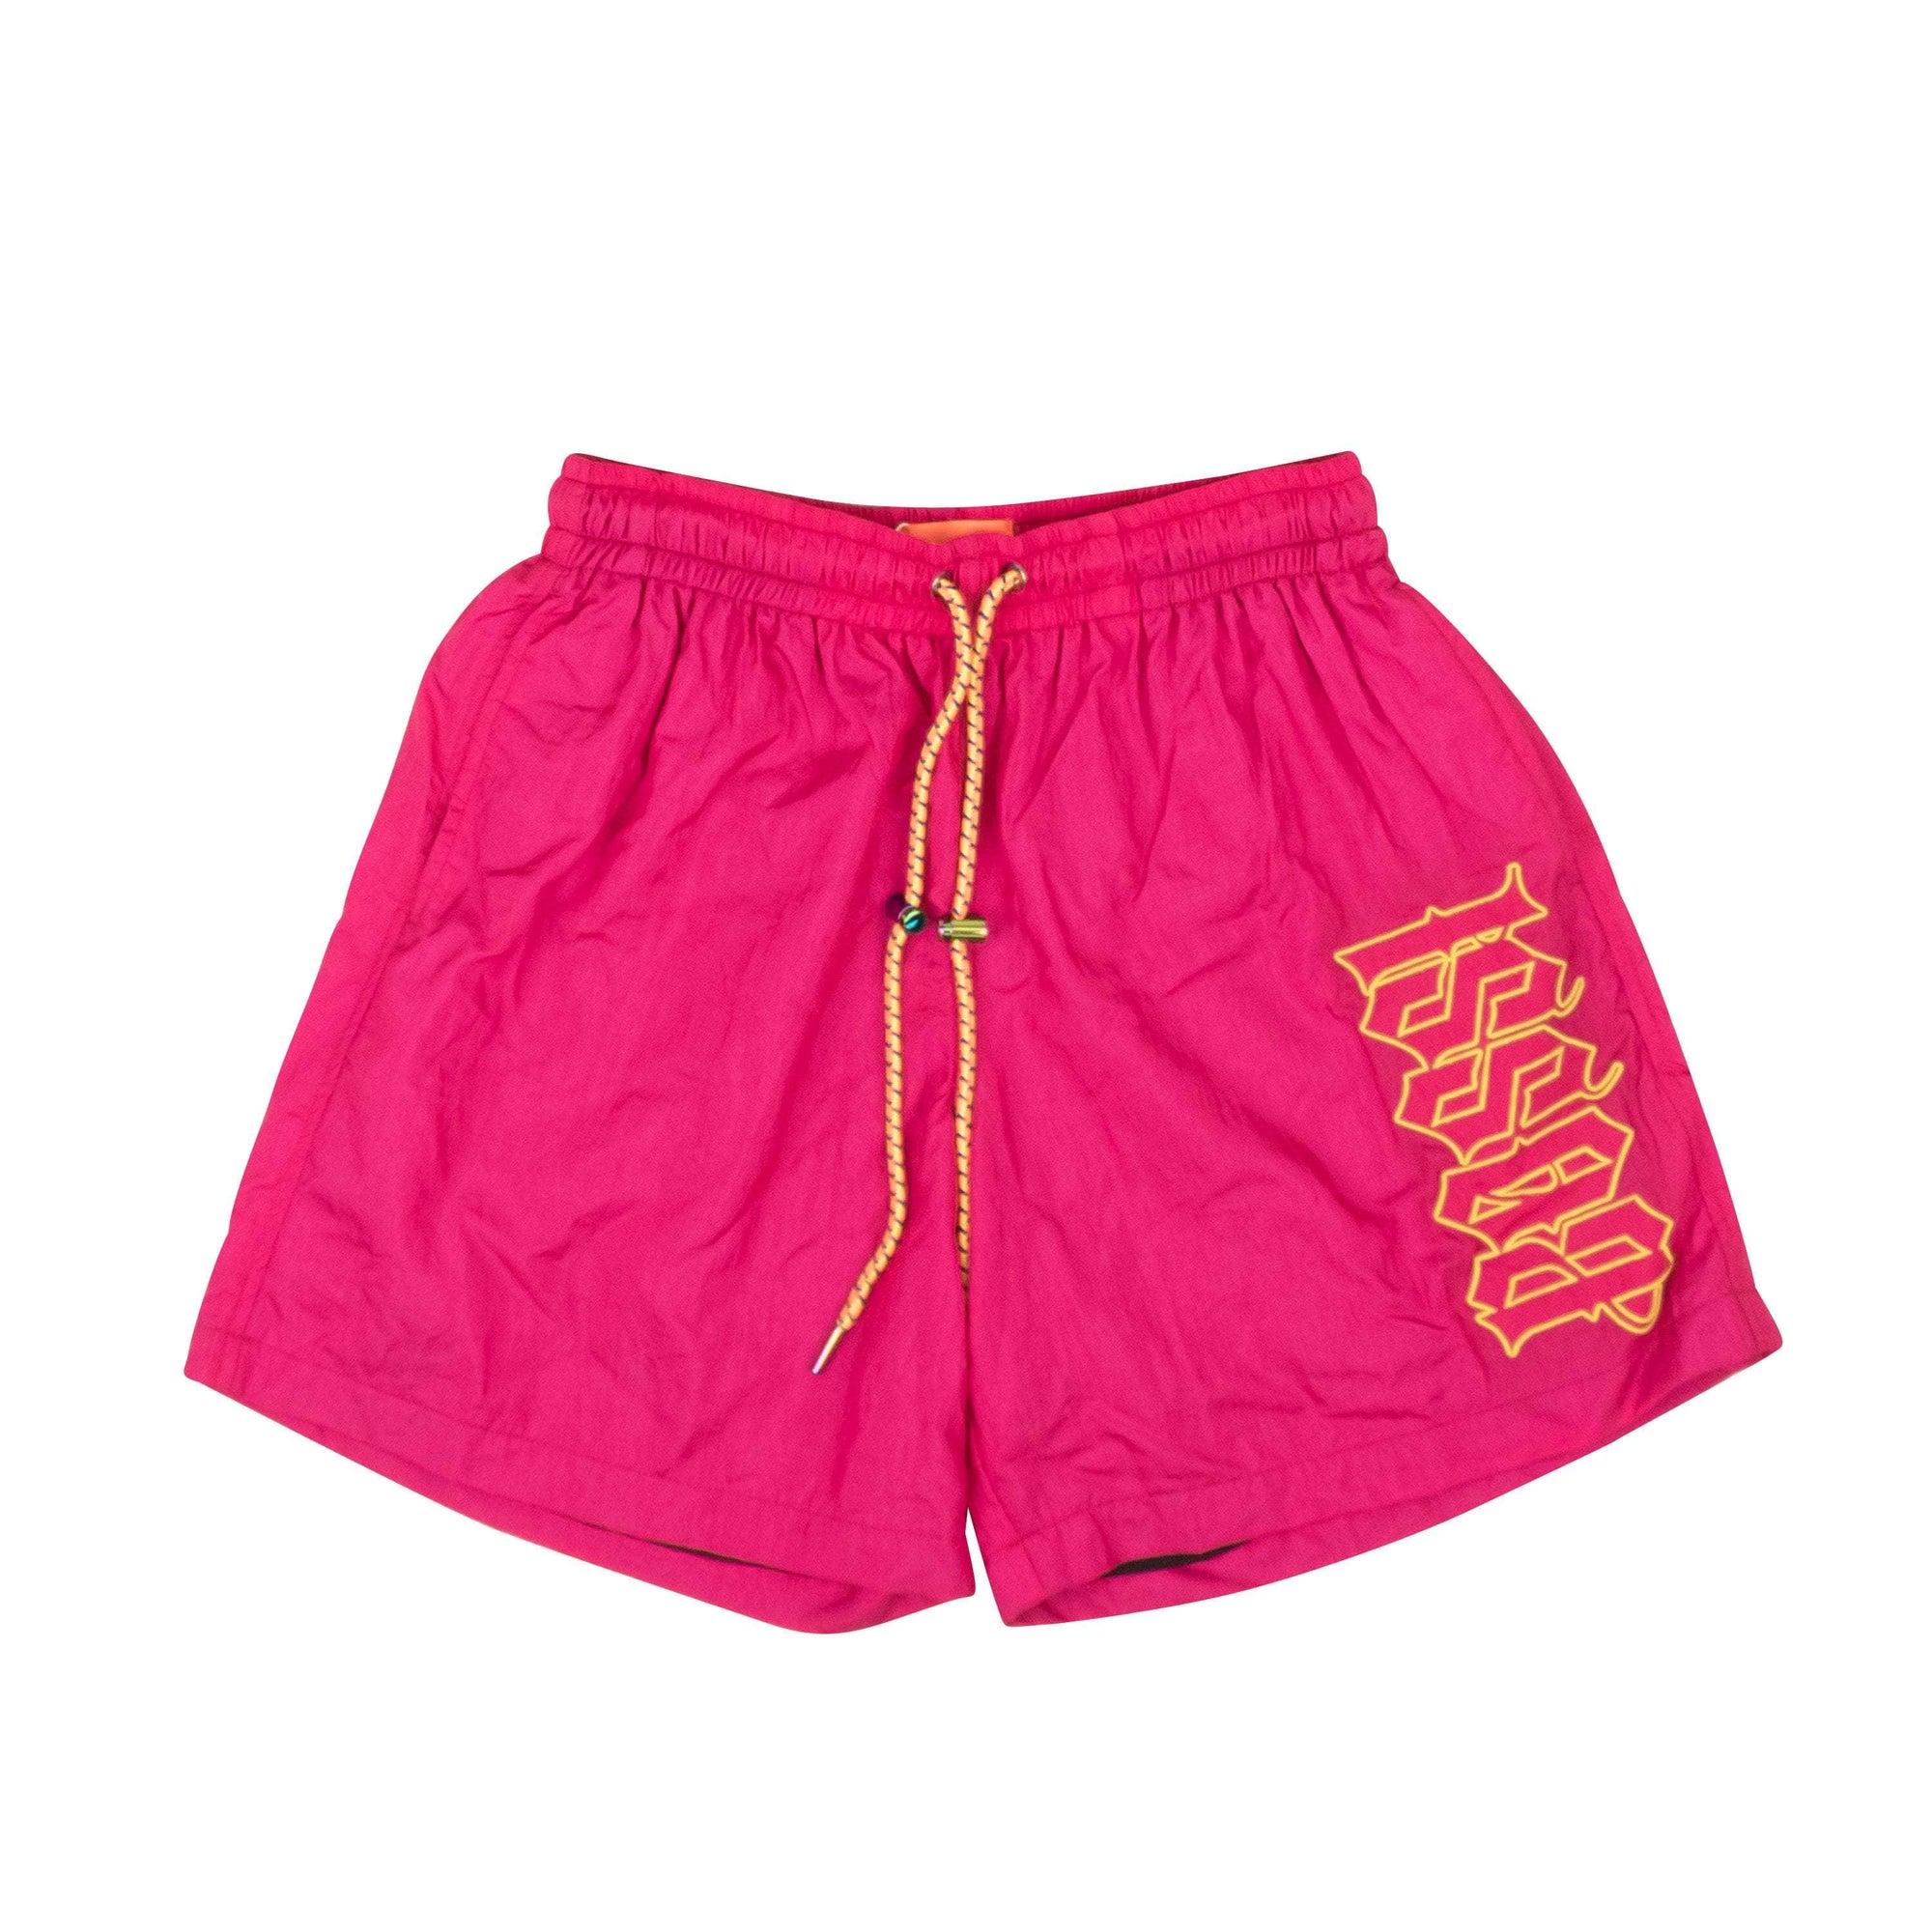 Bossi bossi, channelenable-all, chicmi, couponcollection, gender-mens, main-clothing, mens-shoes, size-s, size-xl, under-250 Fuschia Nylon Logo Print Outline Shorts